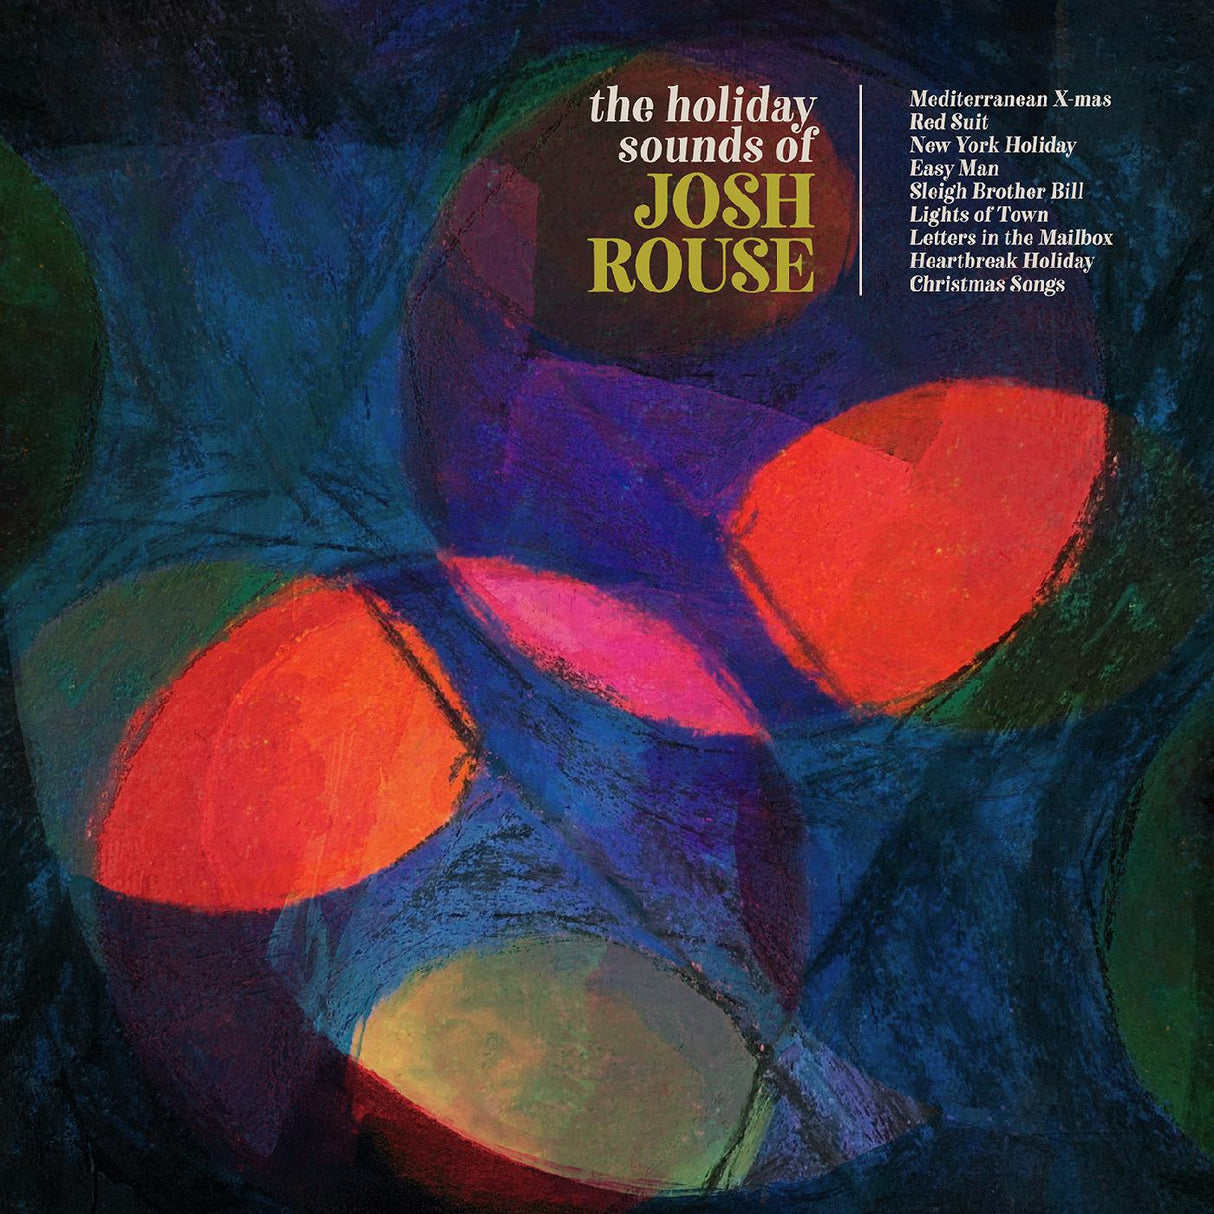 The Holiday Sounds of Josh Rouse [CD]